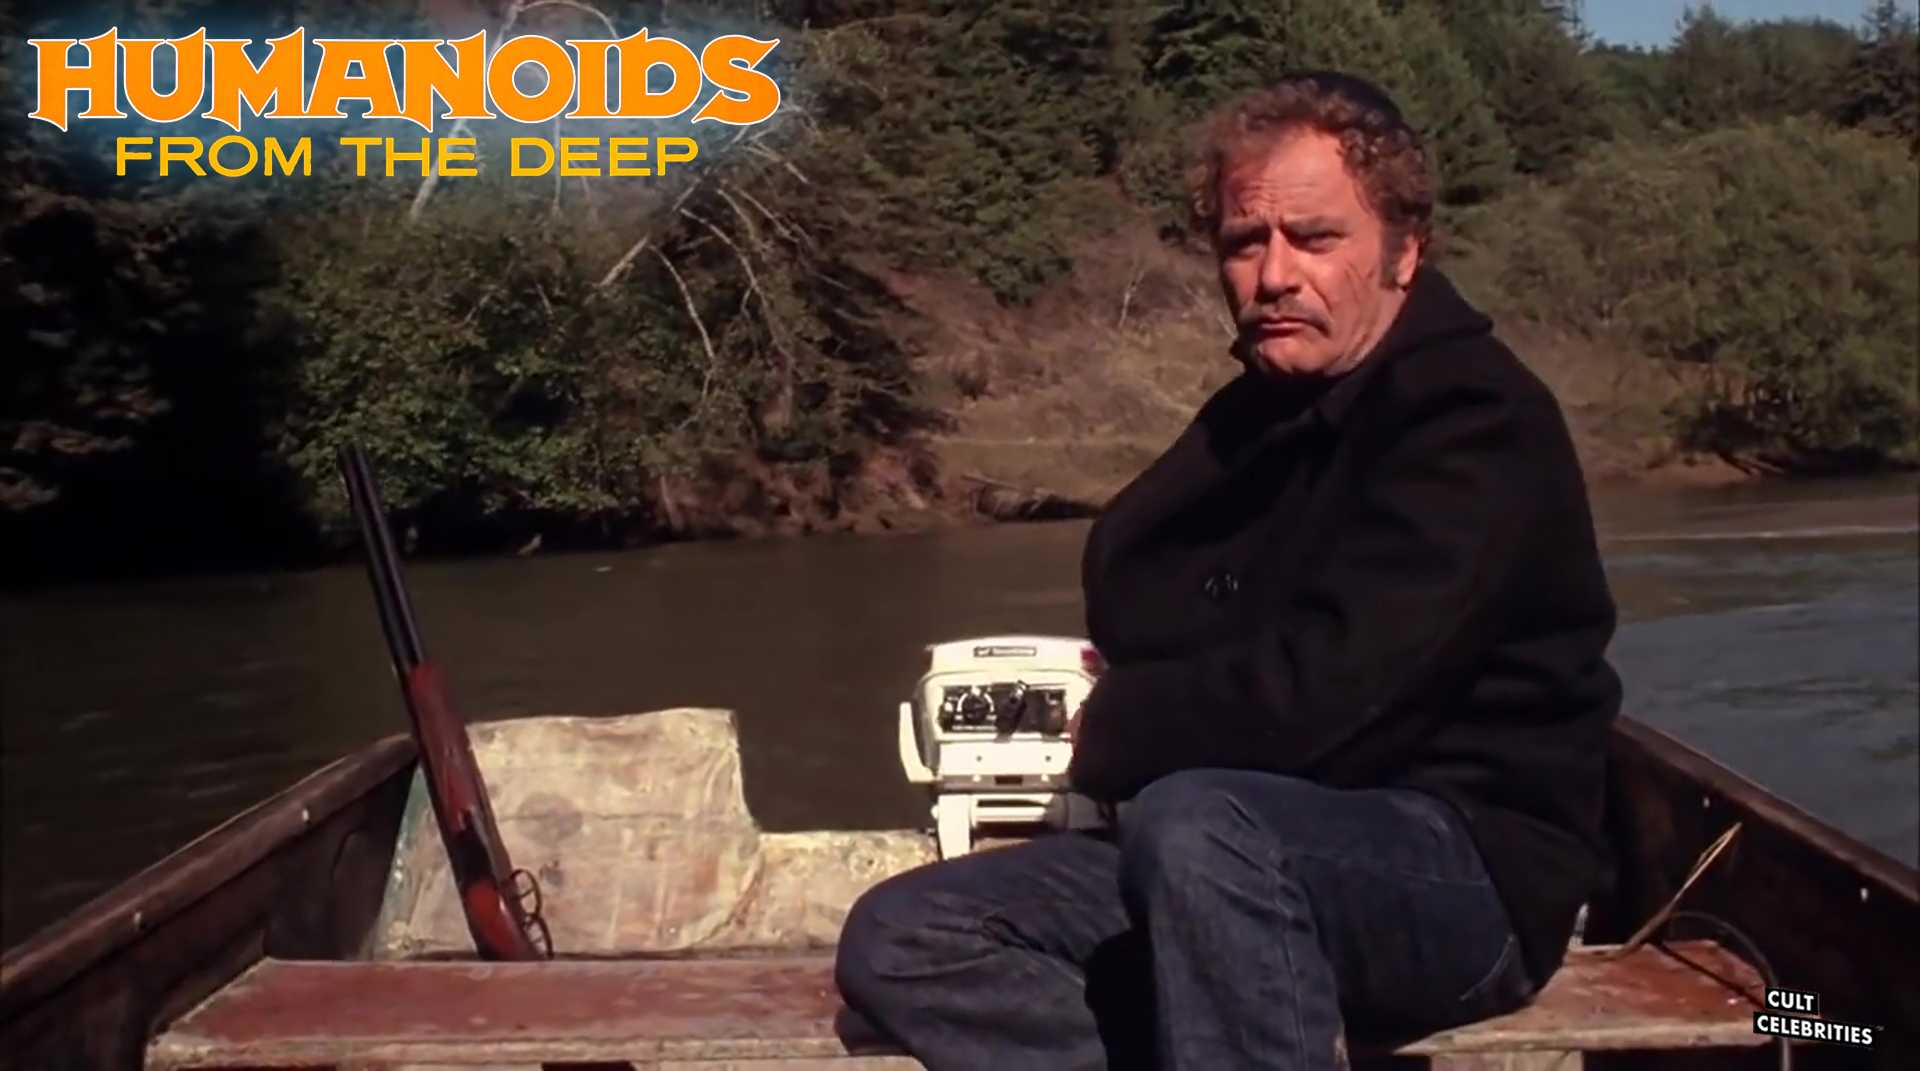 Vic Morrow in Humanoids from the Deep (1980)